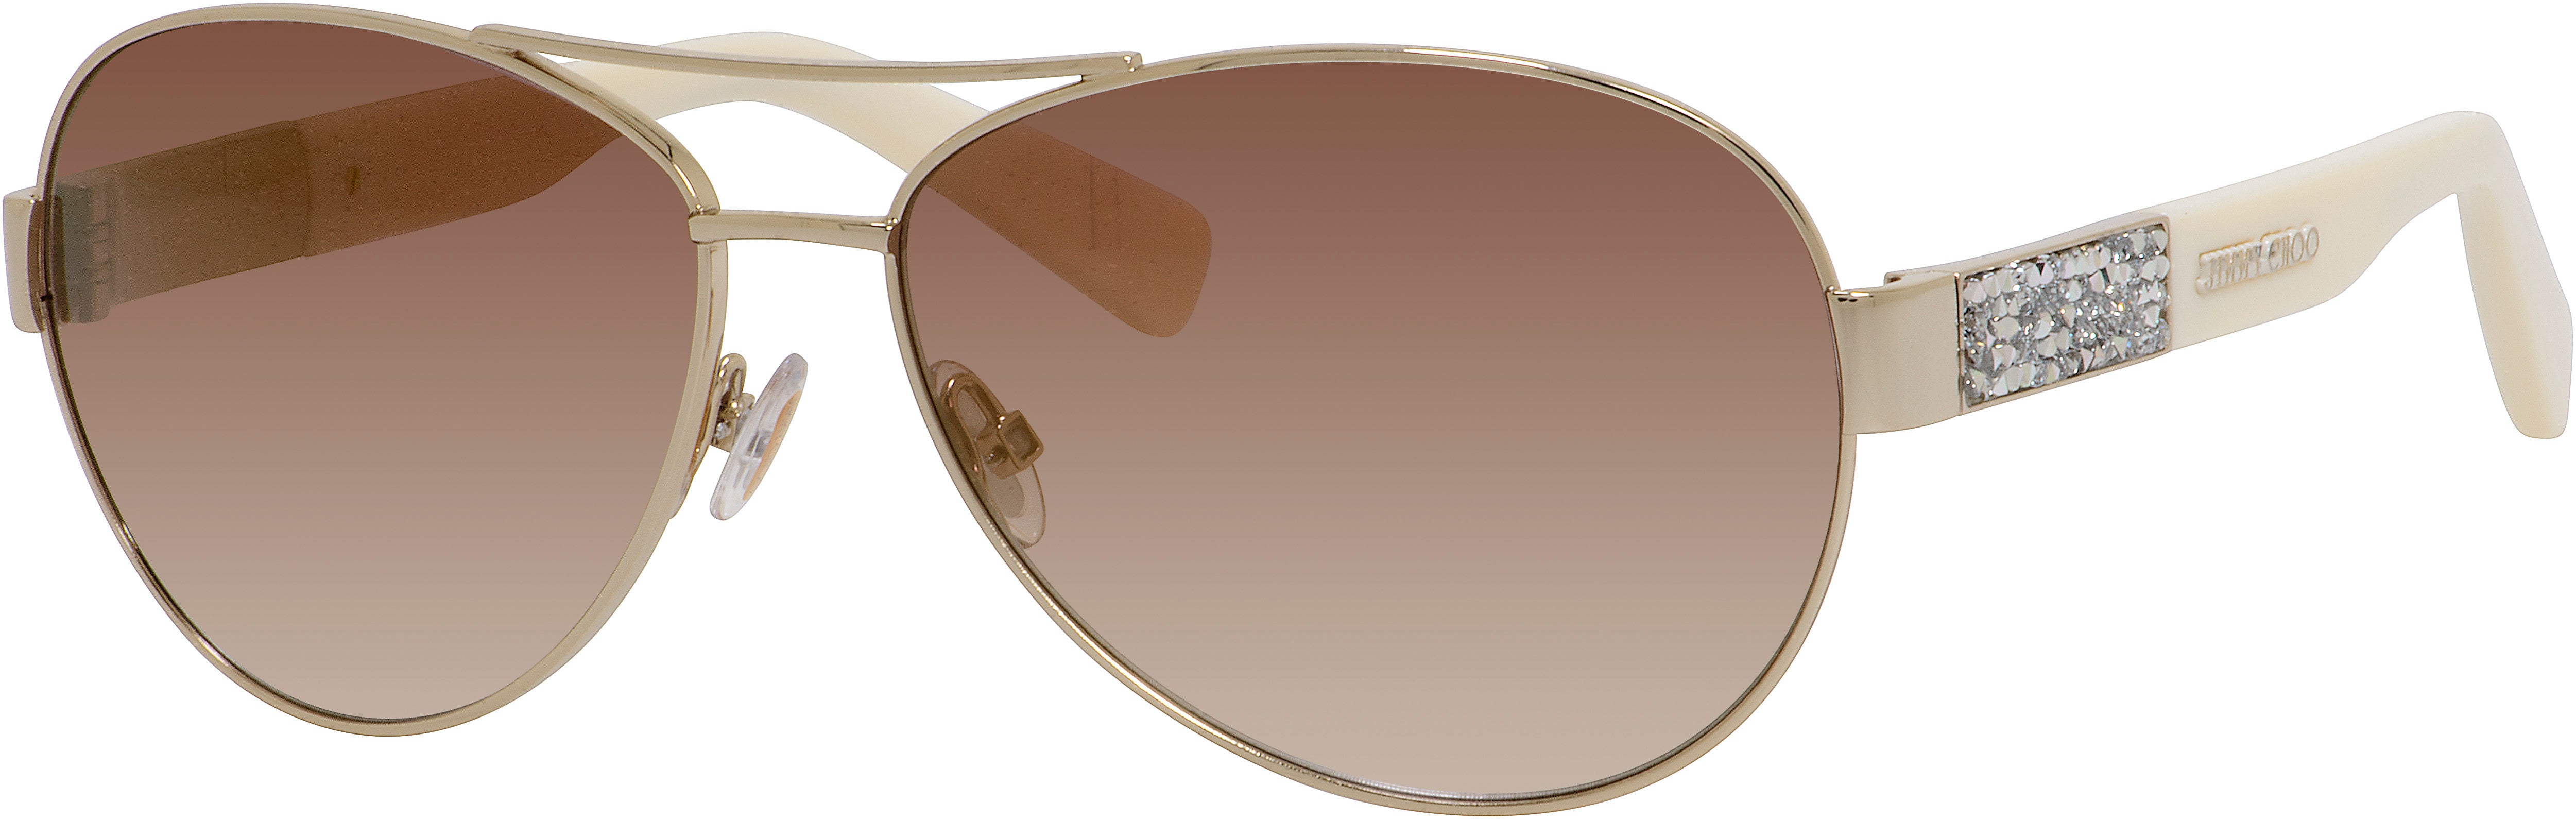 Jimmy Choo Baba/S Aviator Sunglasses 09D4-09D4  Light Gold (QH Brown Mirror Gold Shaded)